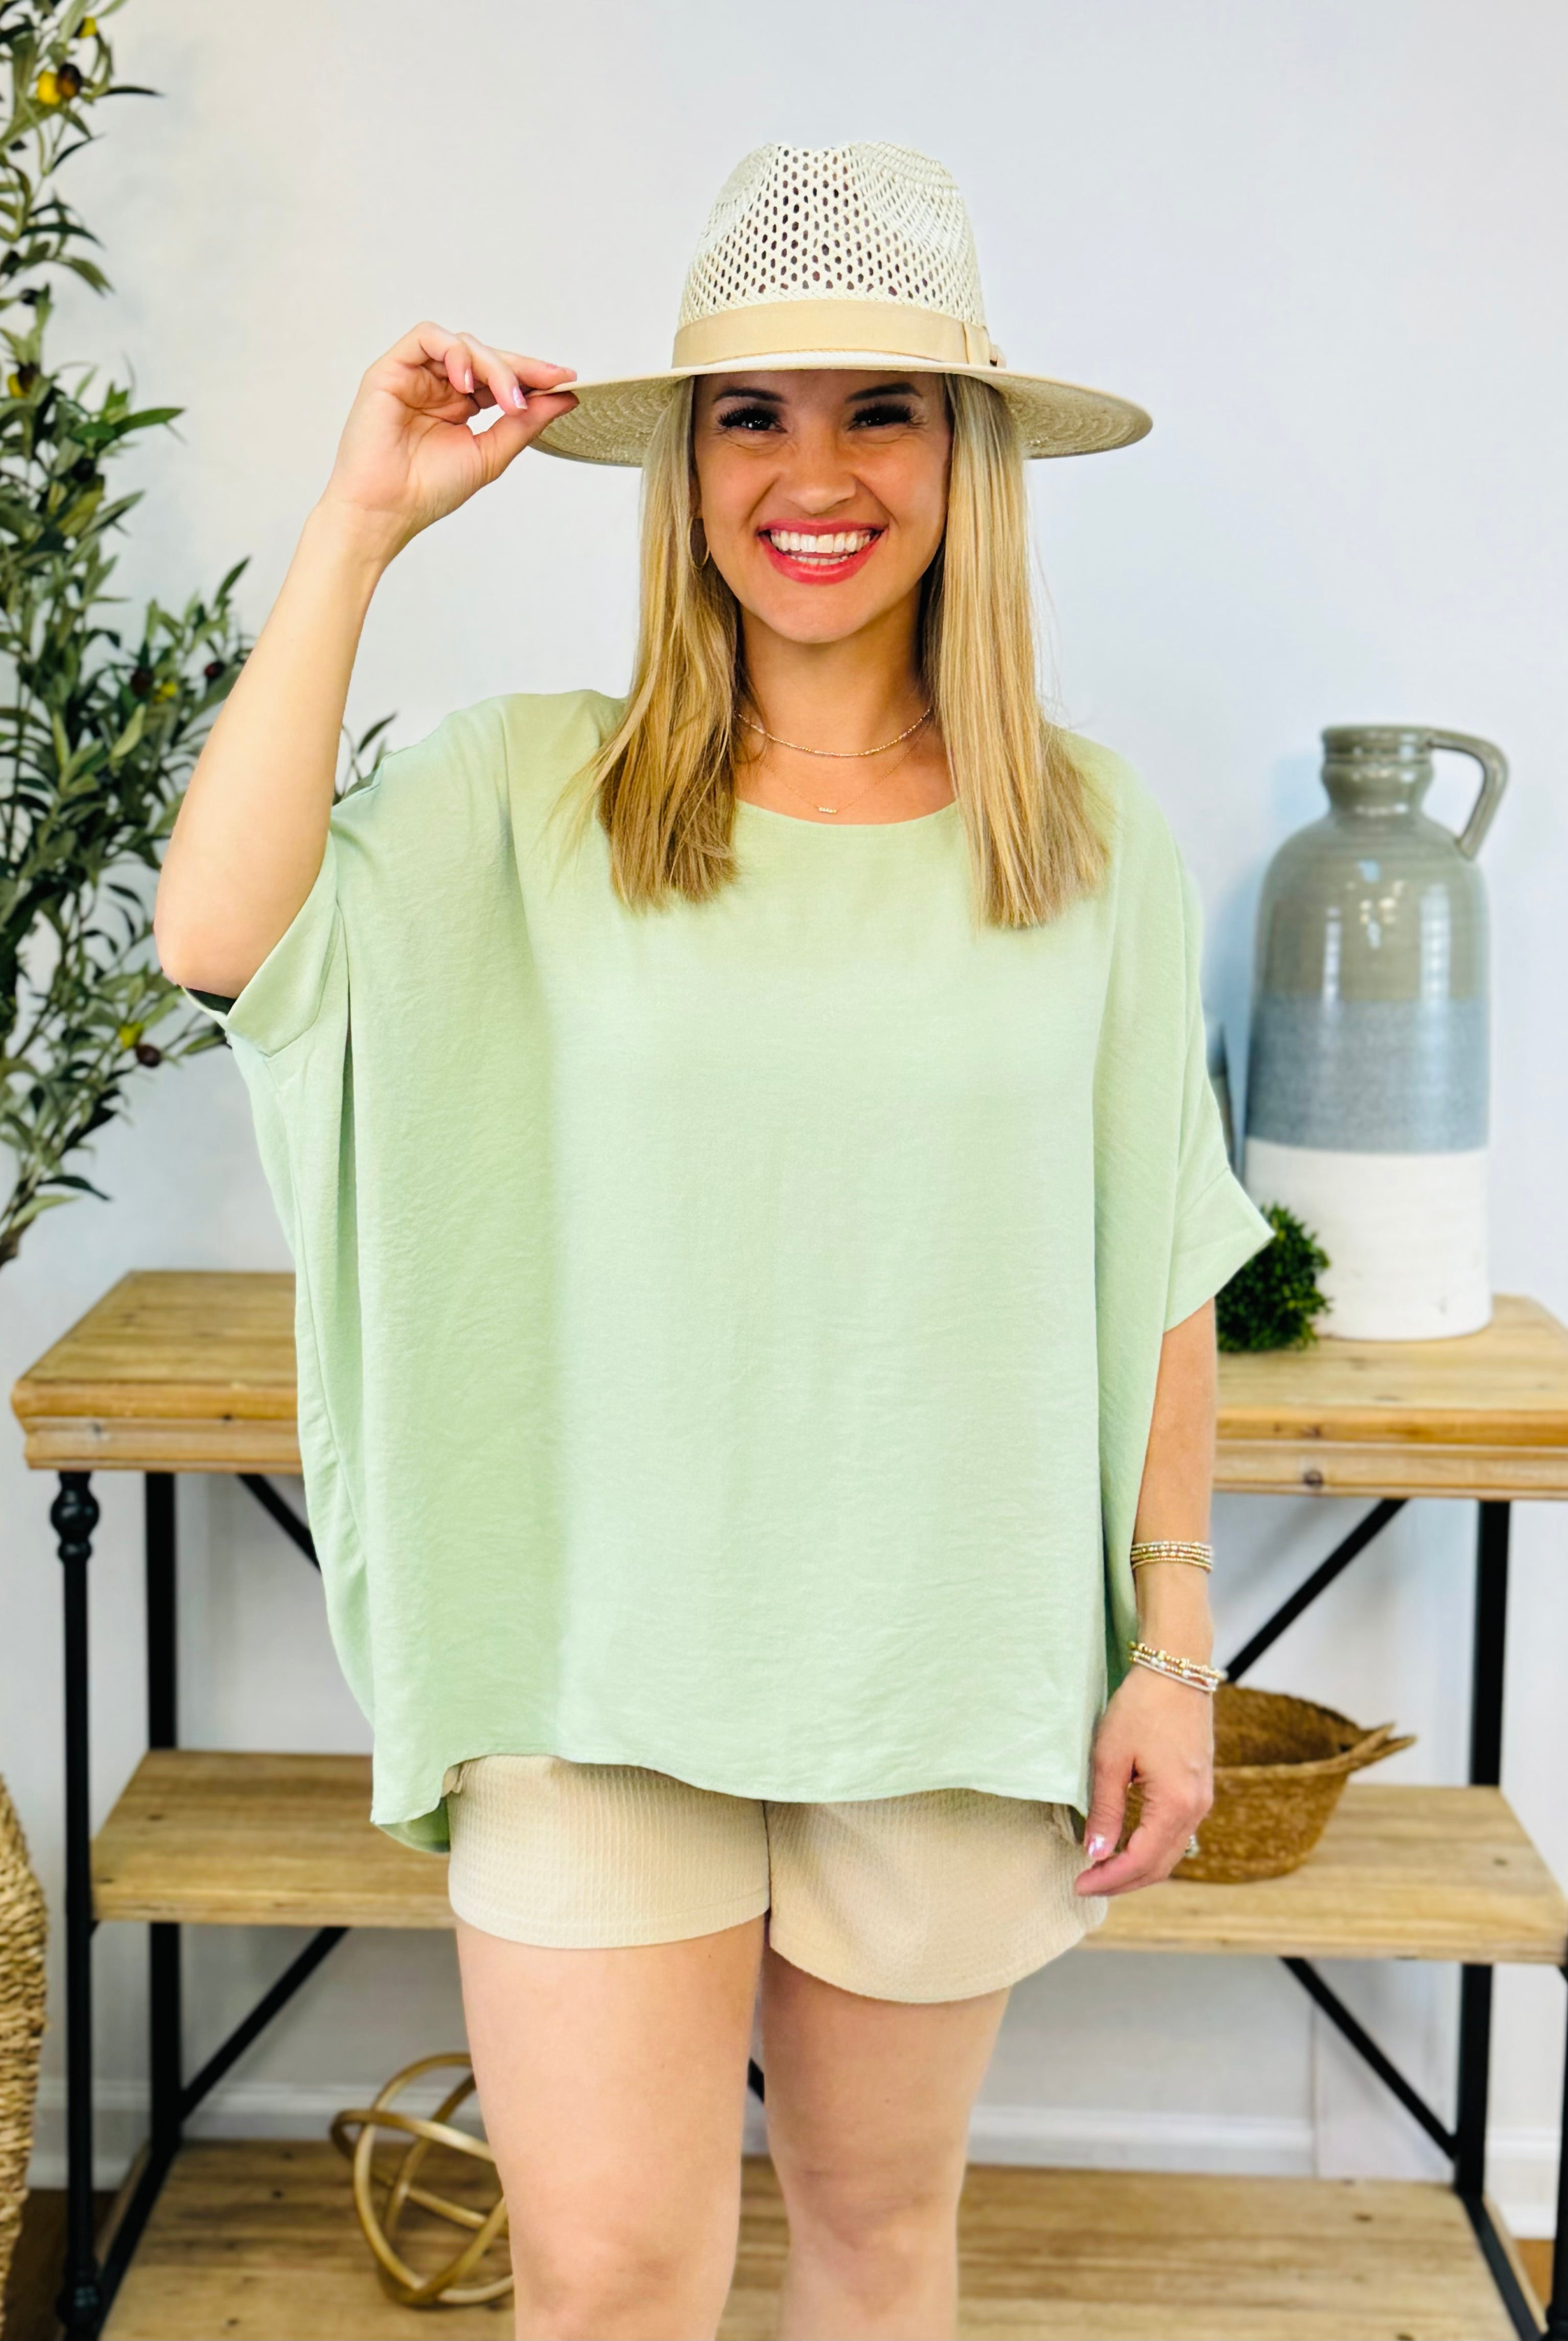 Delightful Days Blouse - Green-100 Short Sleeve Tops-The Lovely Closet-The Lovely Closet, Women's Fashion Boutique in Alexandria, KY